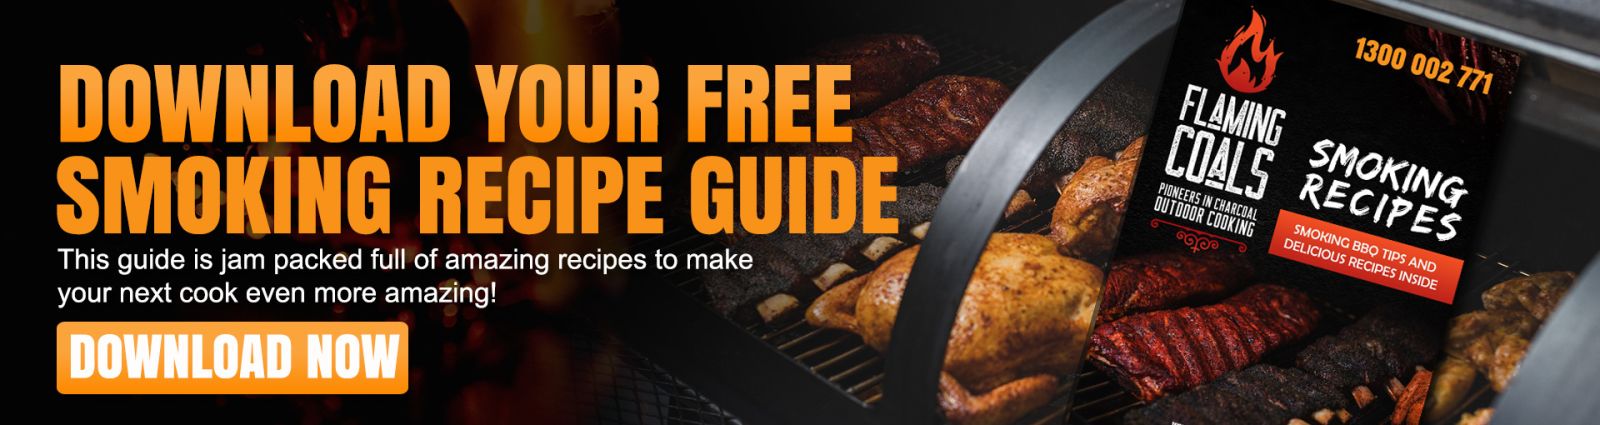 This is a picture of the Smoking recipe Book banner that links to a page where you can download the free recipe book for smoking meat